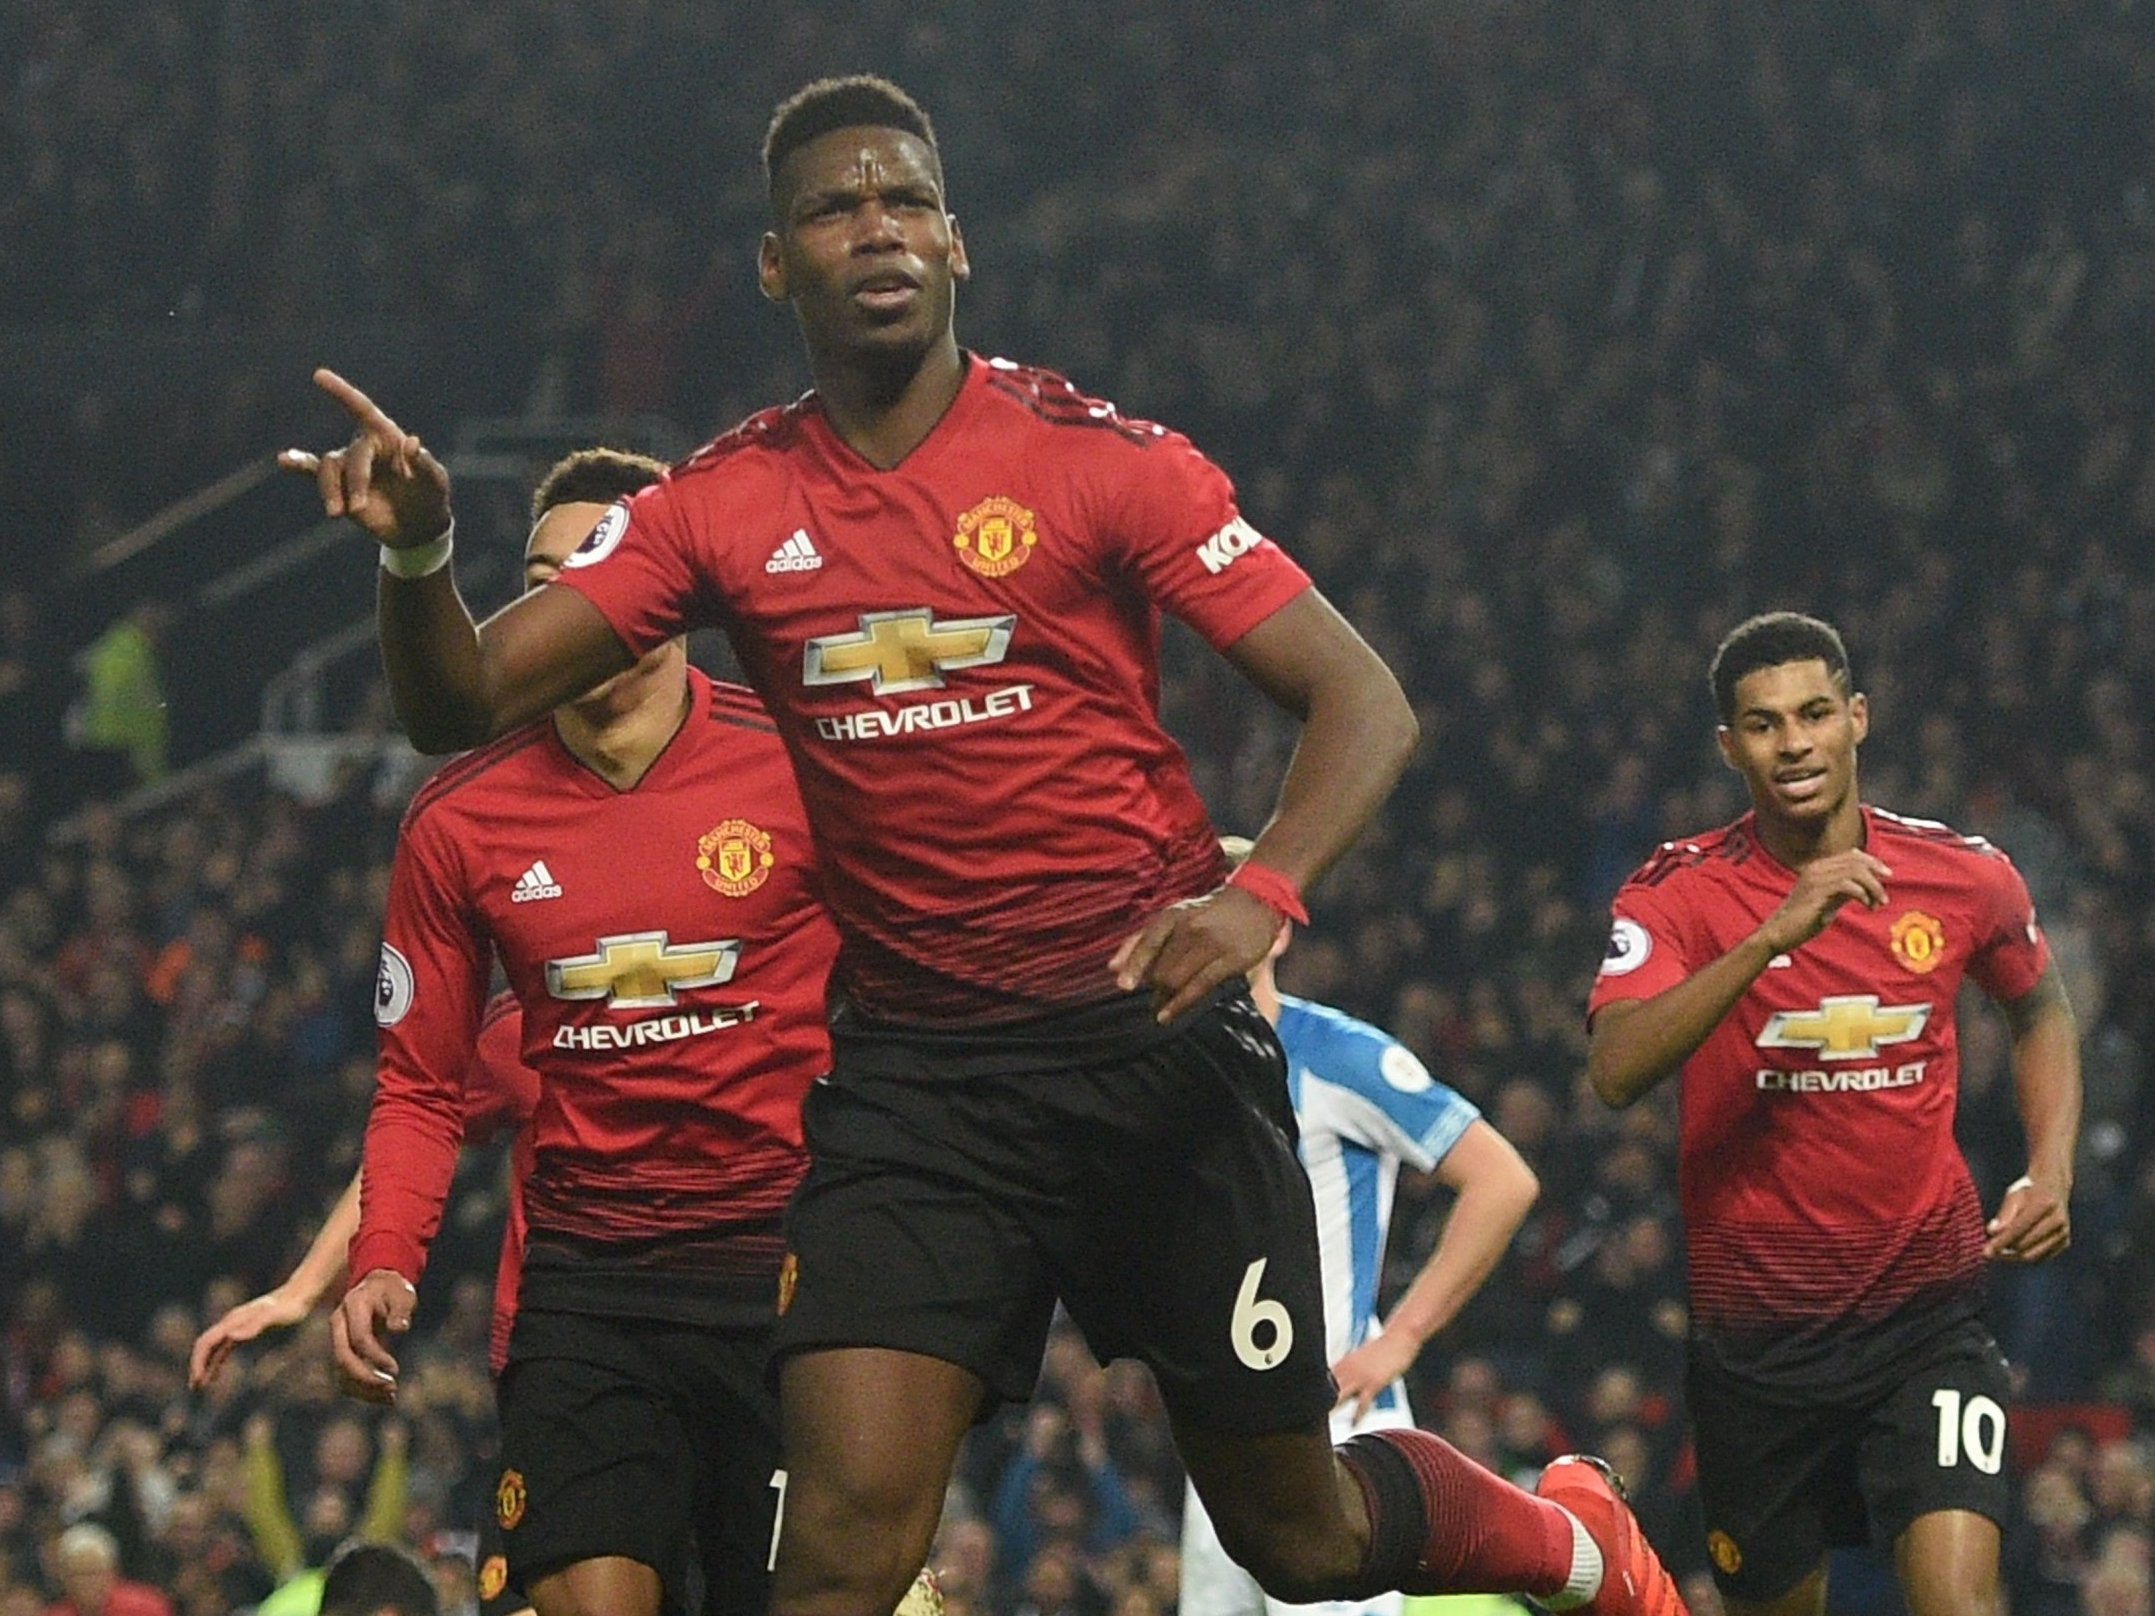 Pogba celebrates after netting his second goal of the match